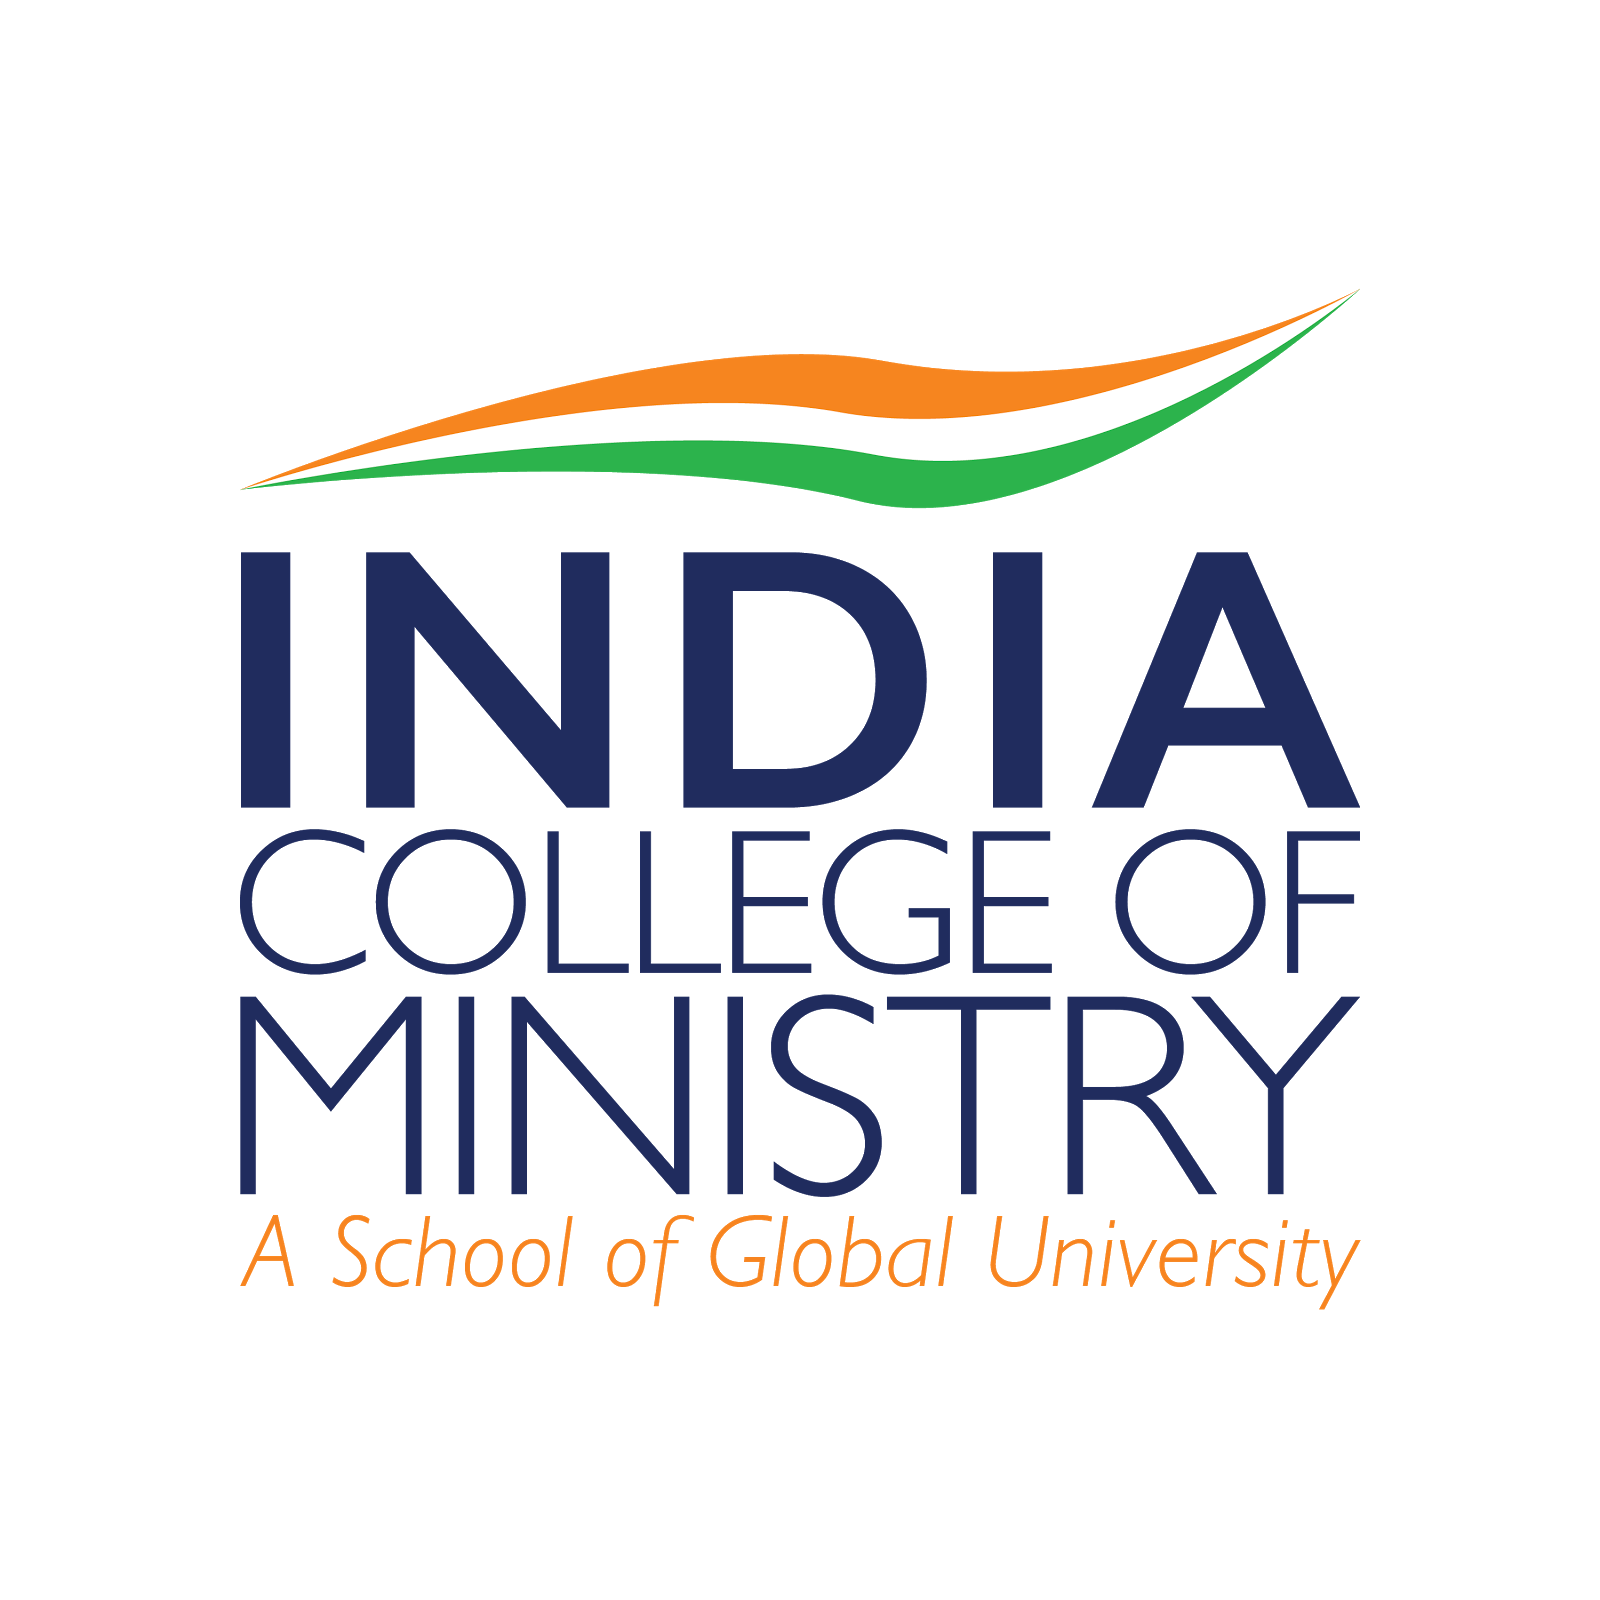 INDIA COLLEGE OF MINISTRY